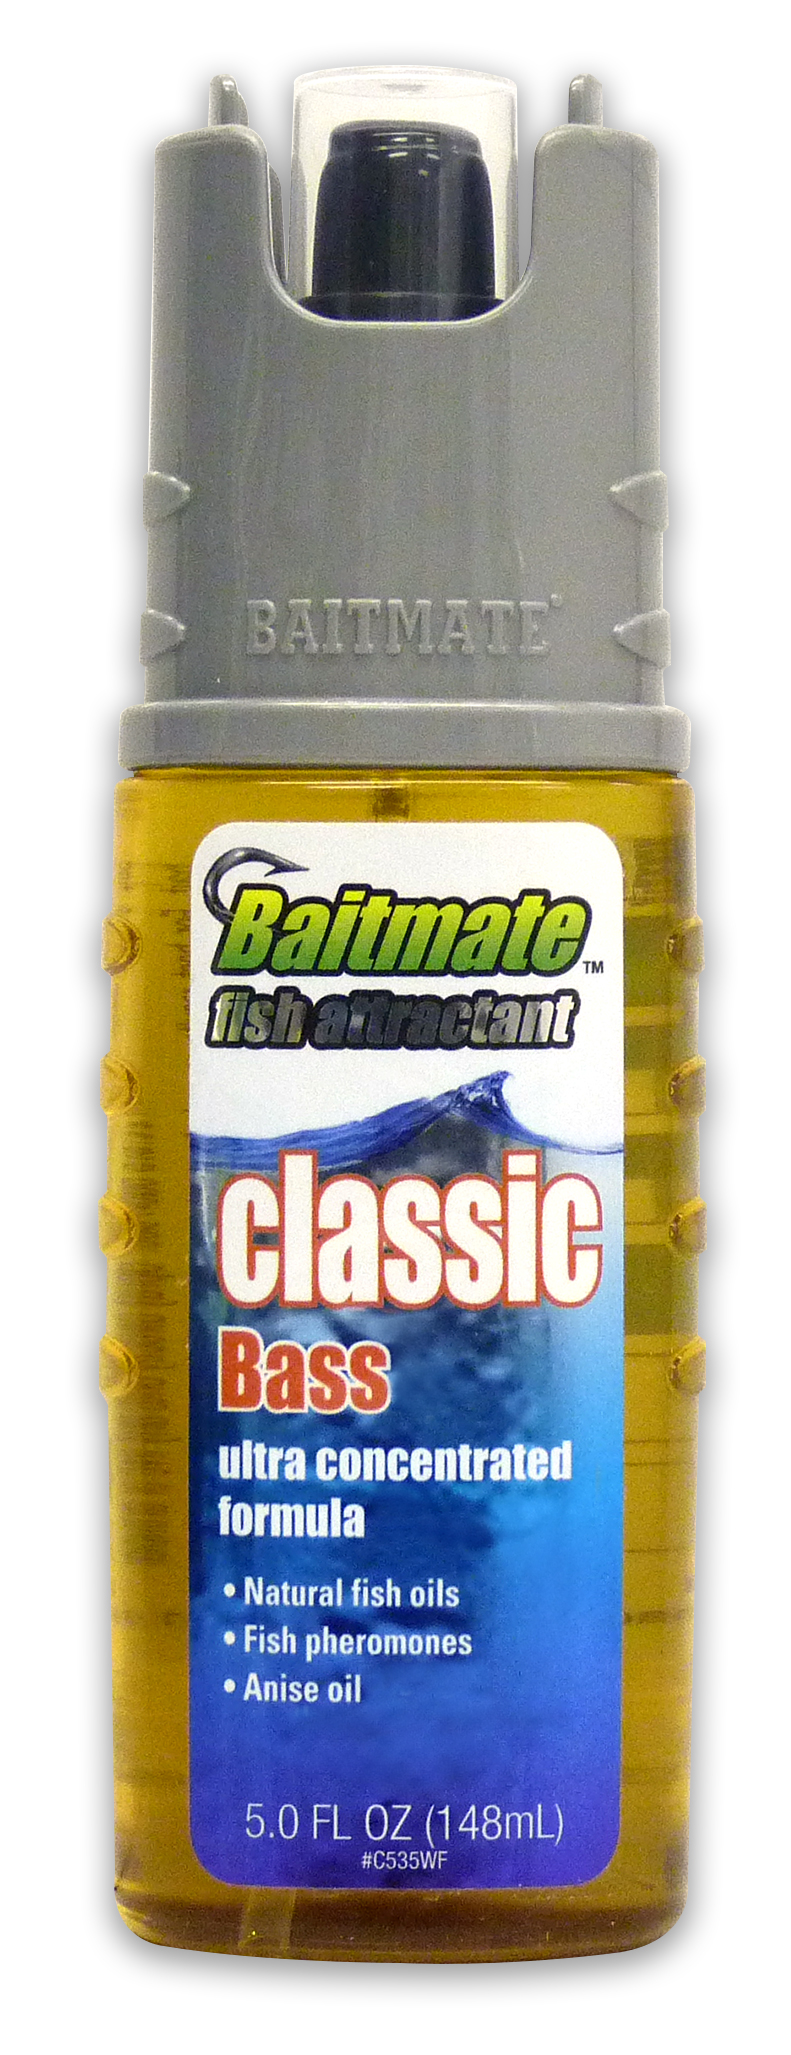 Baitmate Classic Bass Fish Attractant - image 1 of 4